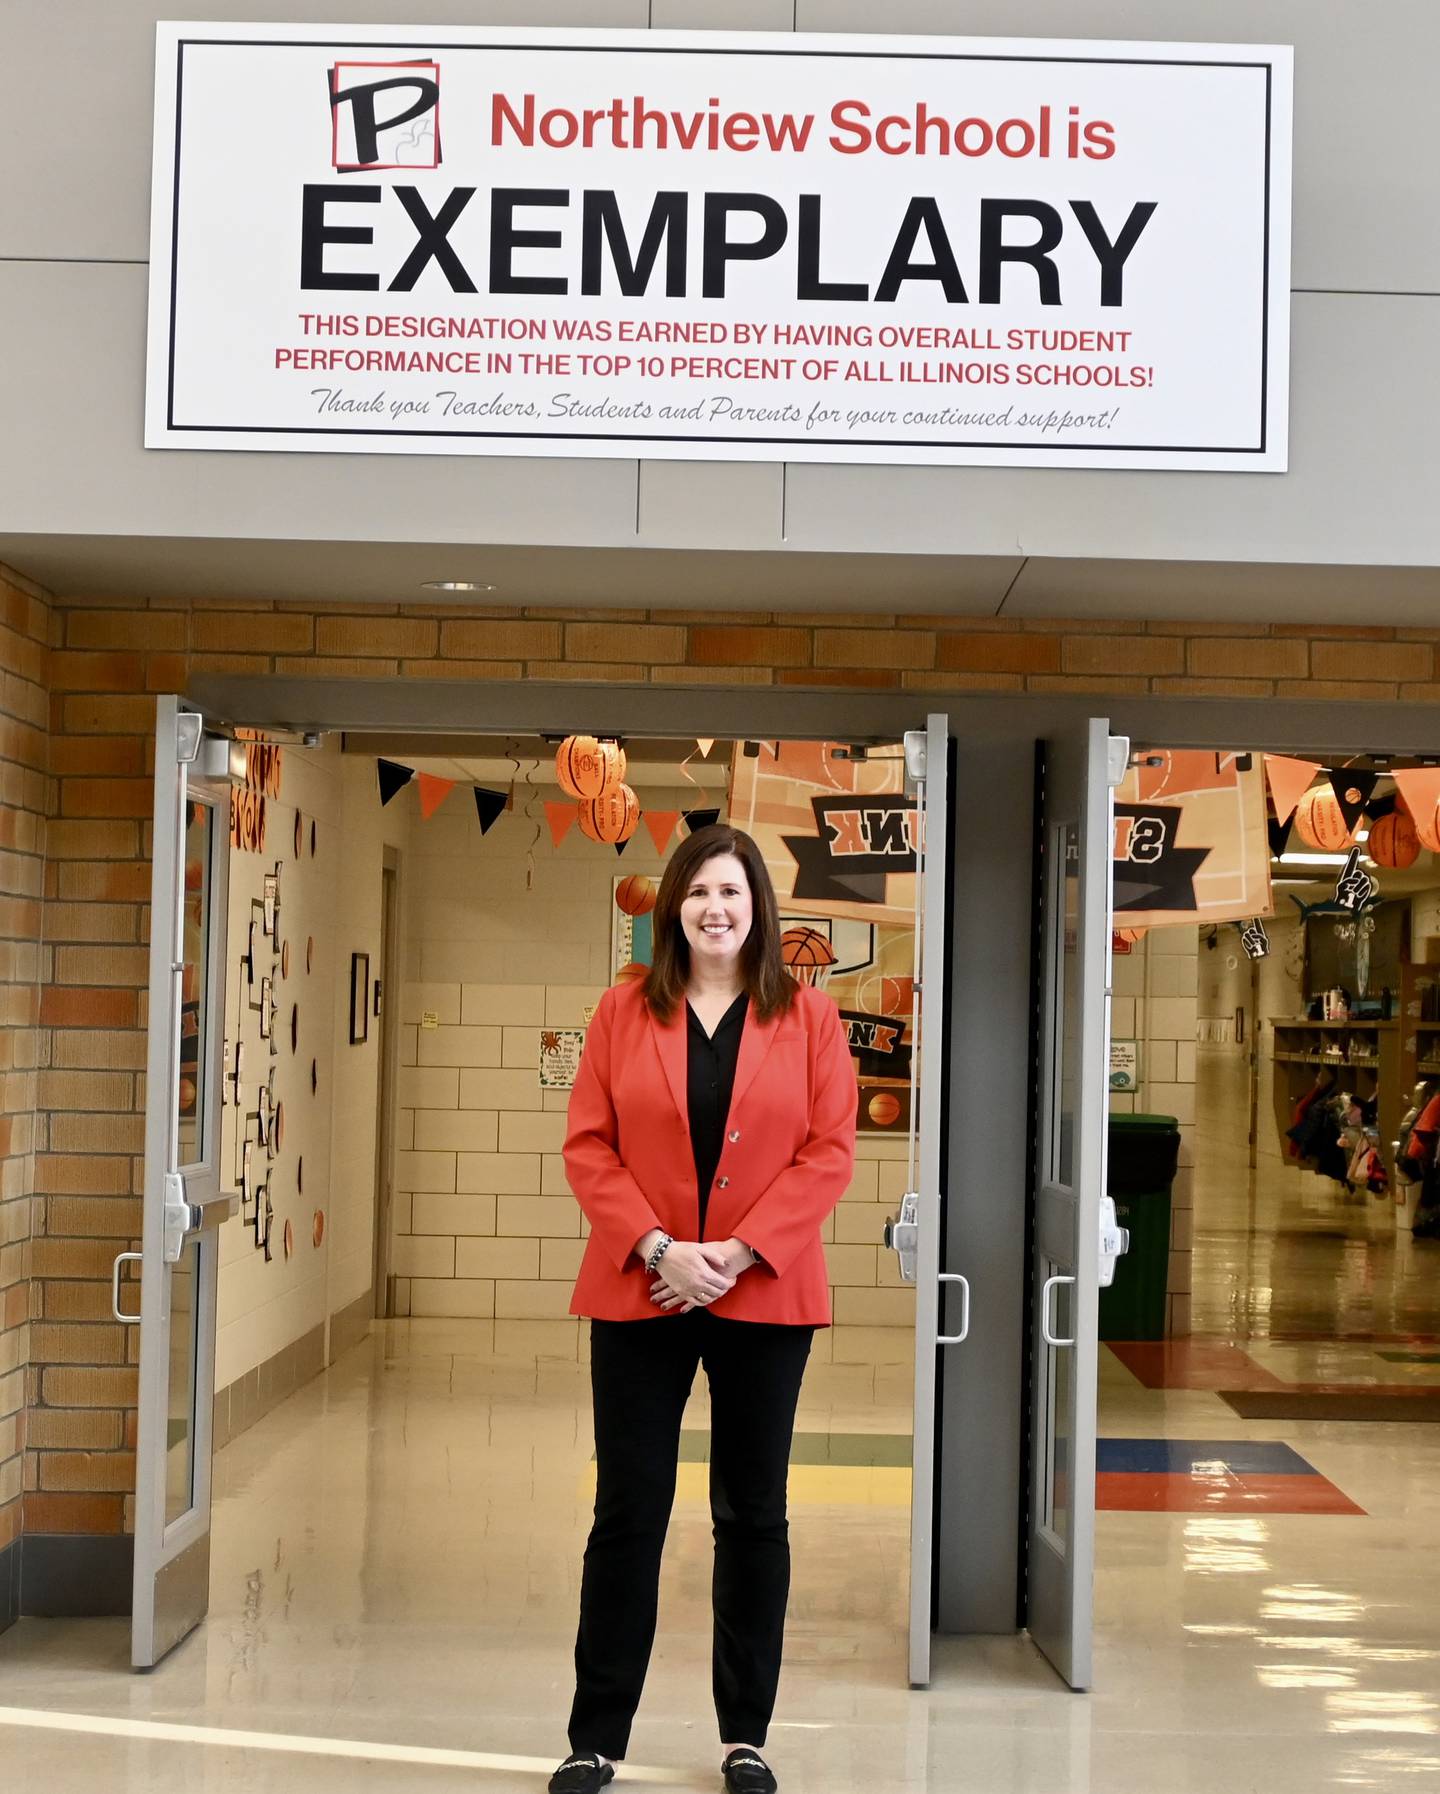 Baker said she wants each one of her students to leave her school each day with an excitement for learning.
“I want them to be engaged and inquisitive,” she said. “And I also want them to feel safe and respected.”